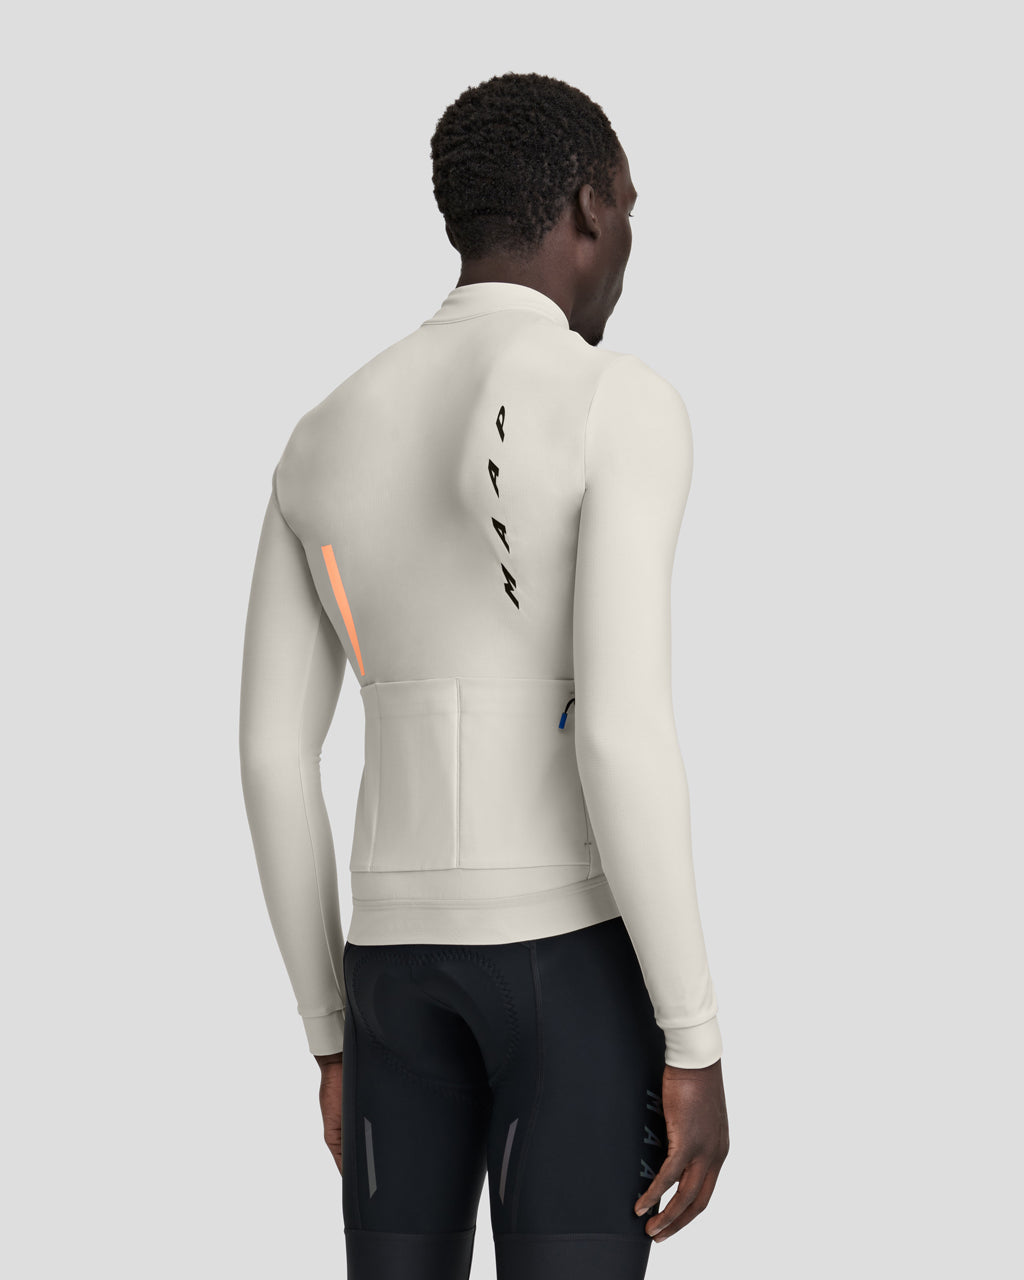 Evade Thermal Ls Jersey Fog | MAAP US